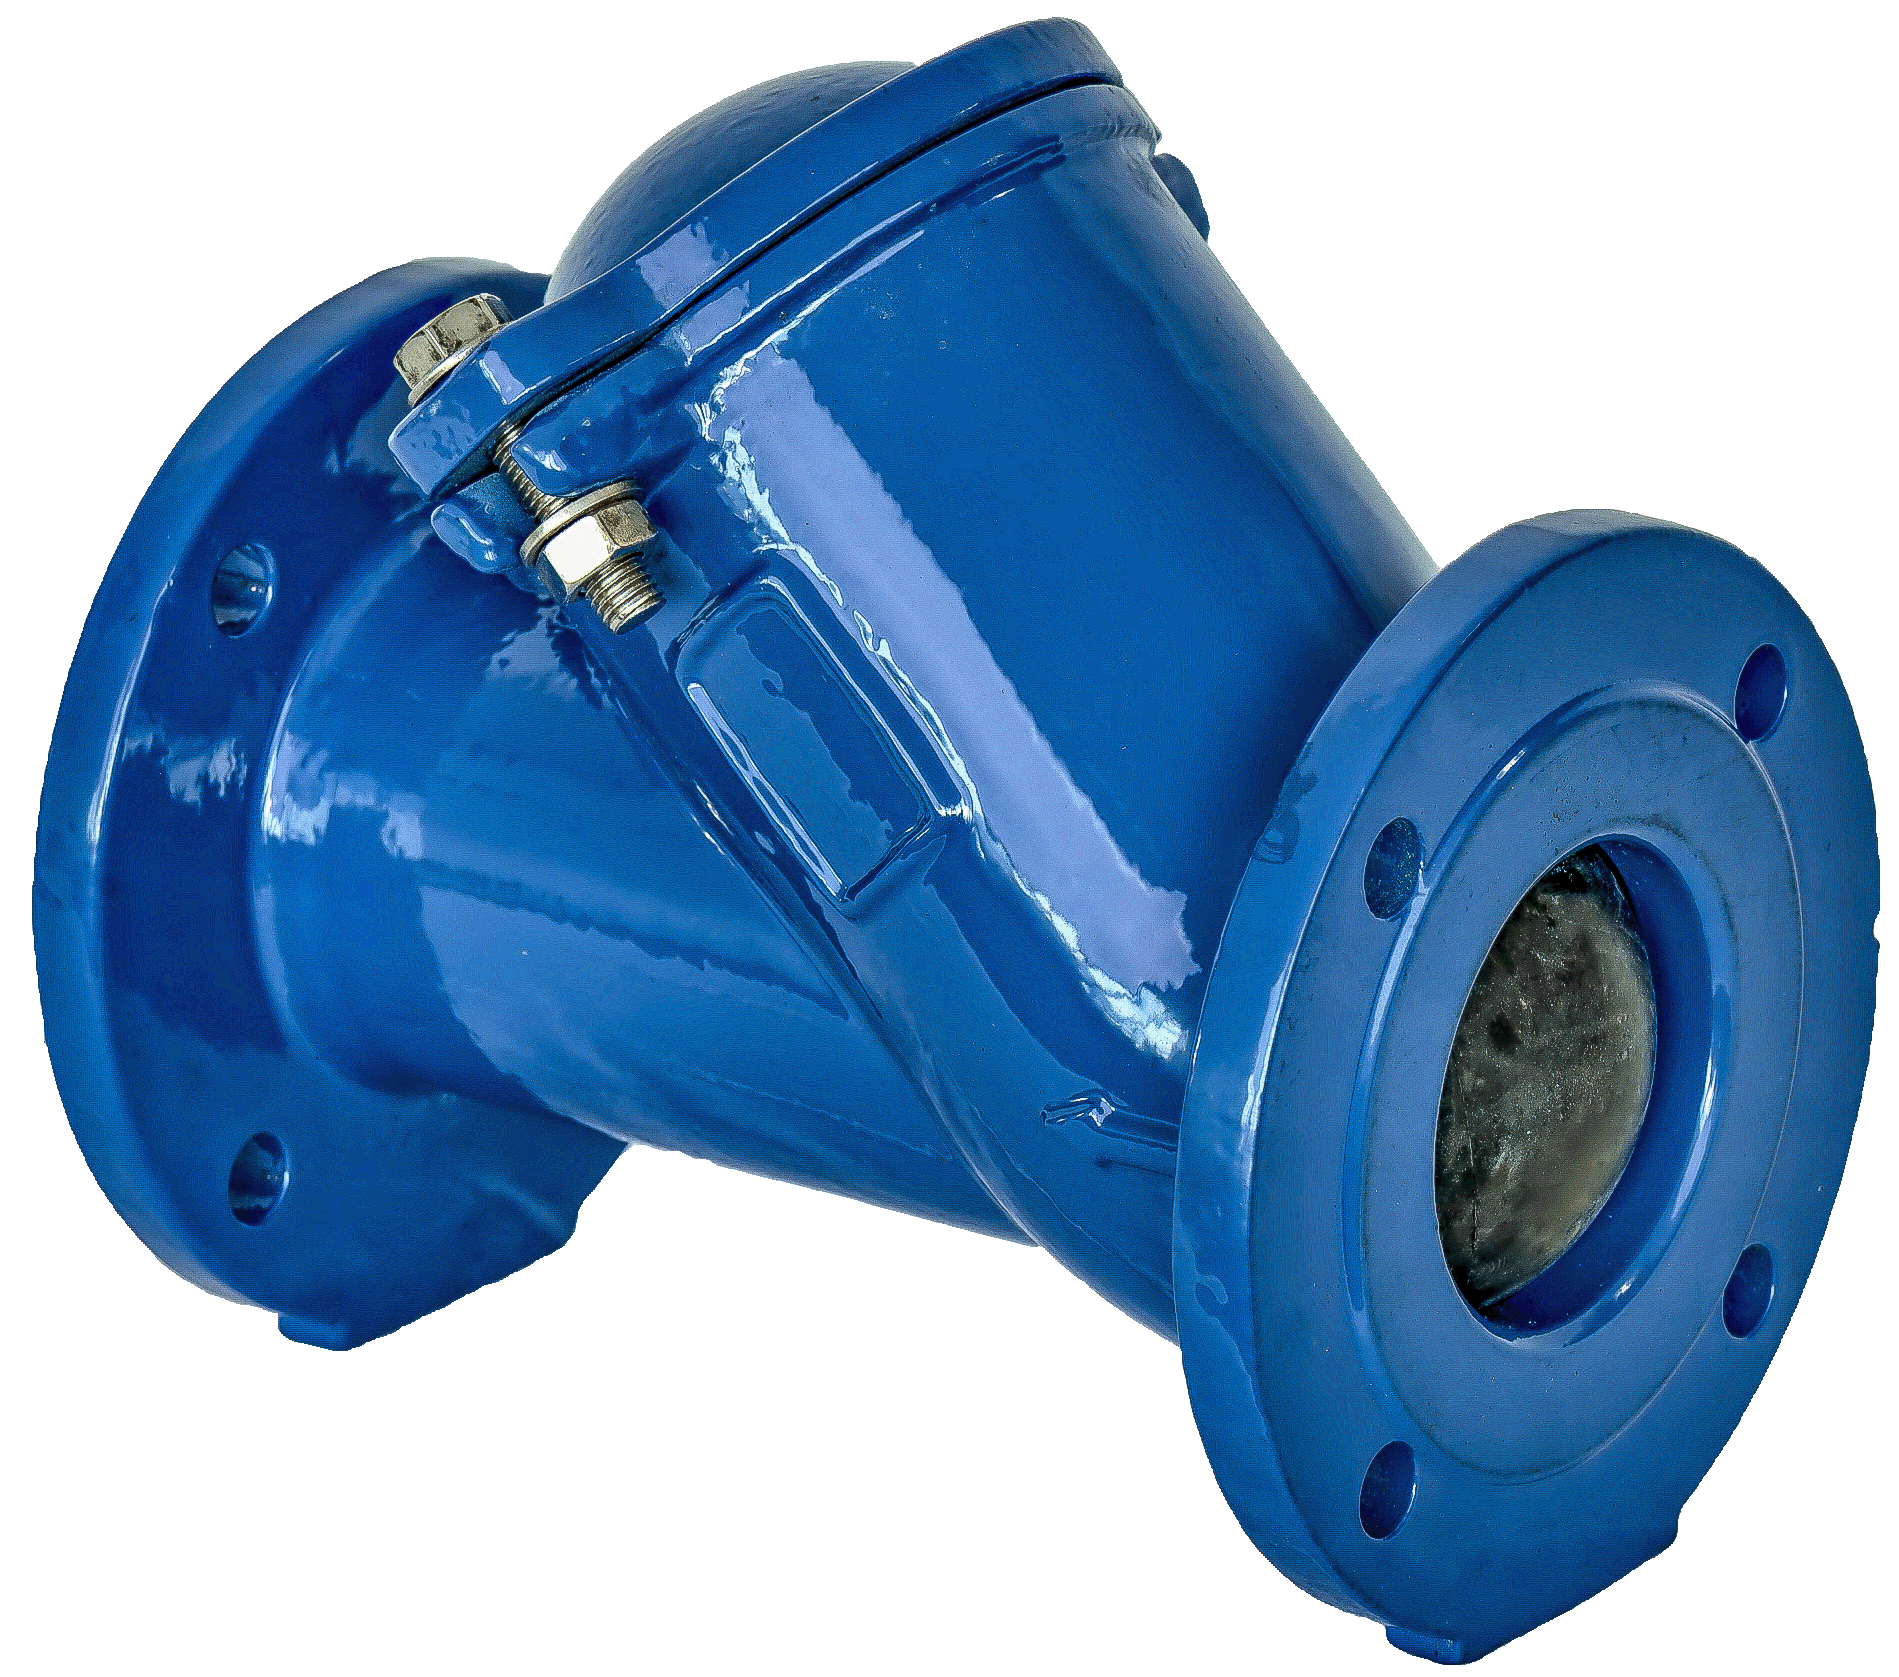 CAST IRON BALL CHECK VALVE FLANGED TABLE D